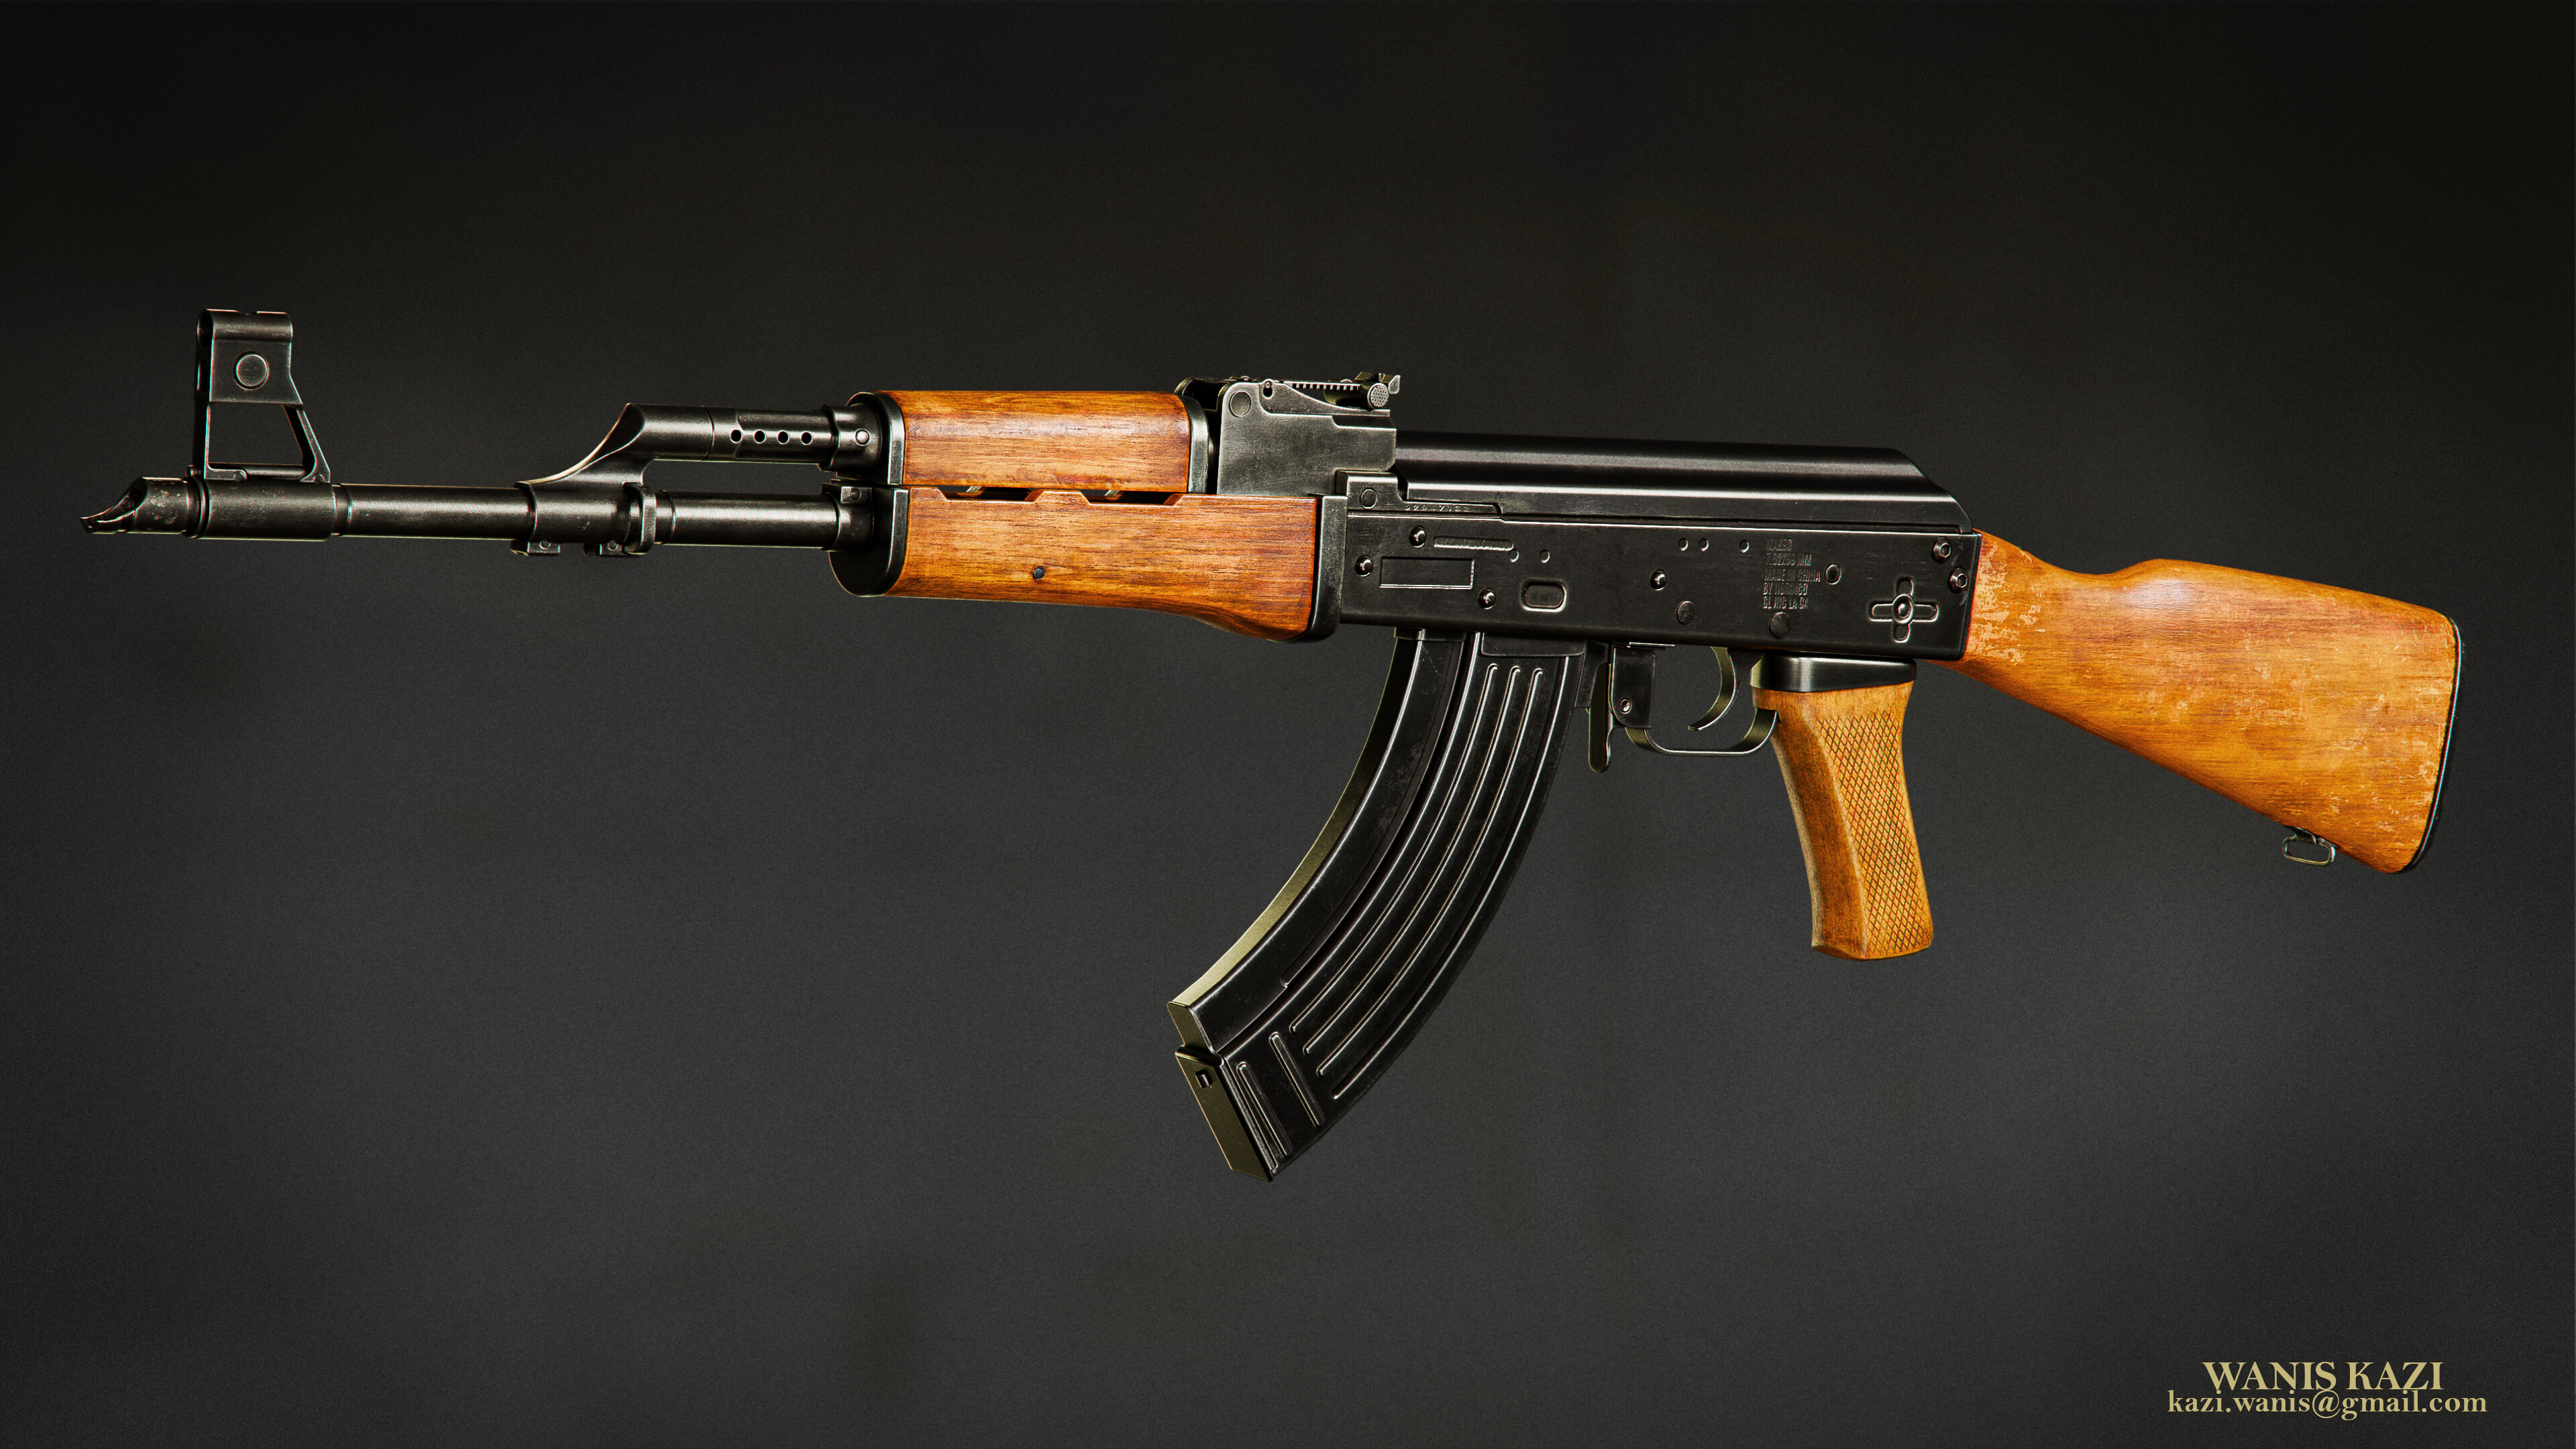 AK 47 Game ready - Finished Projects - Blender Artists Community